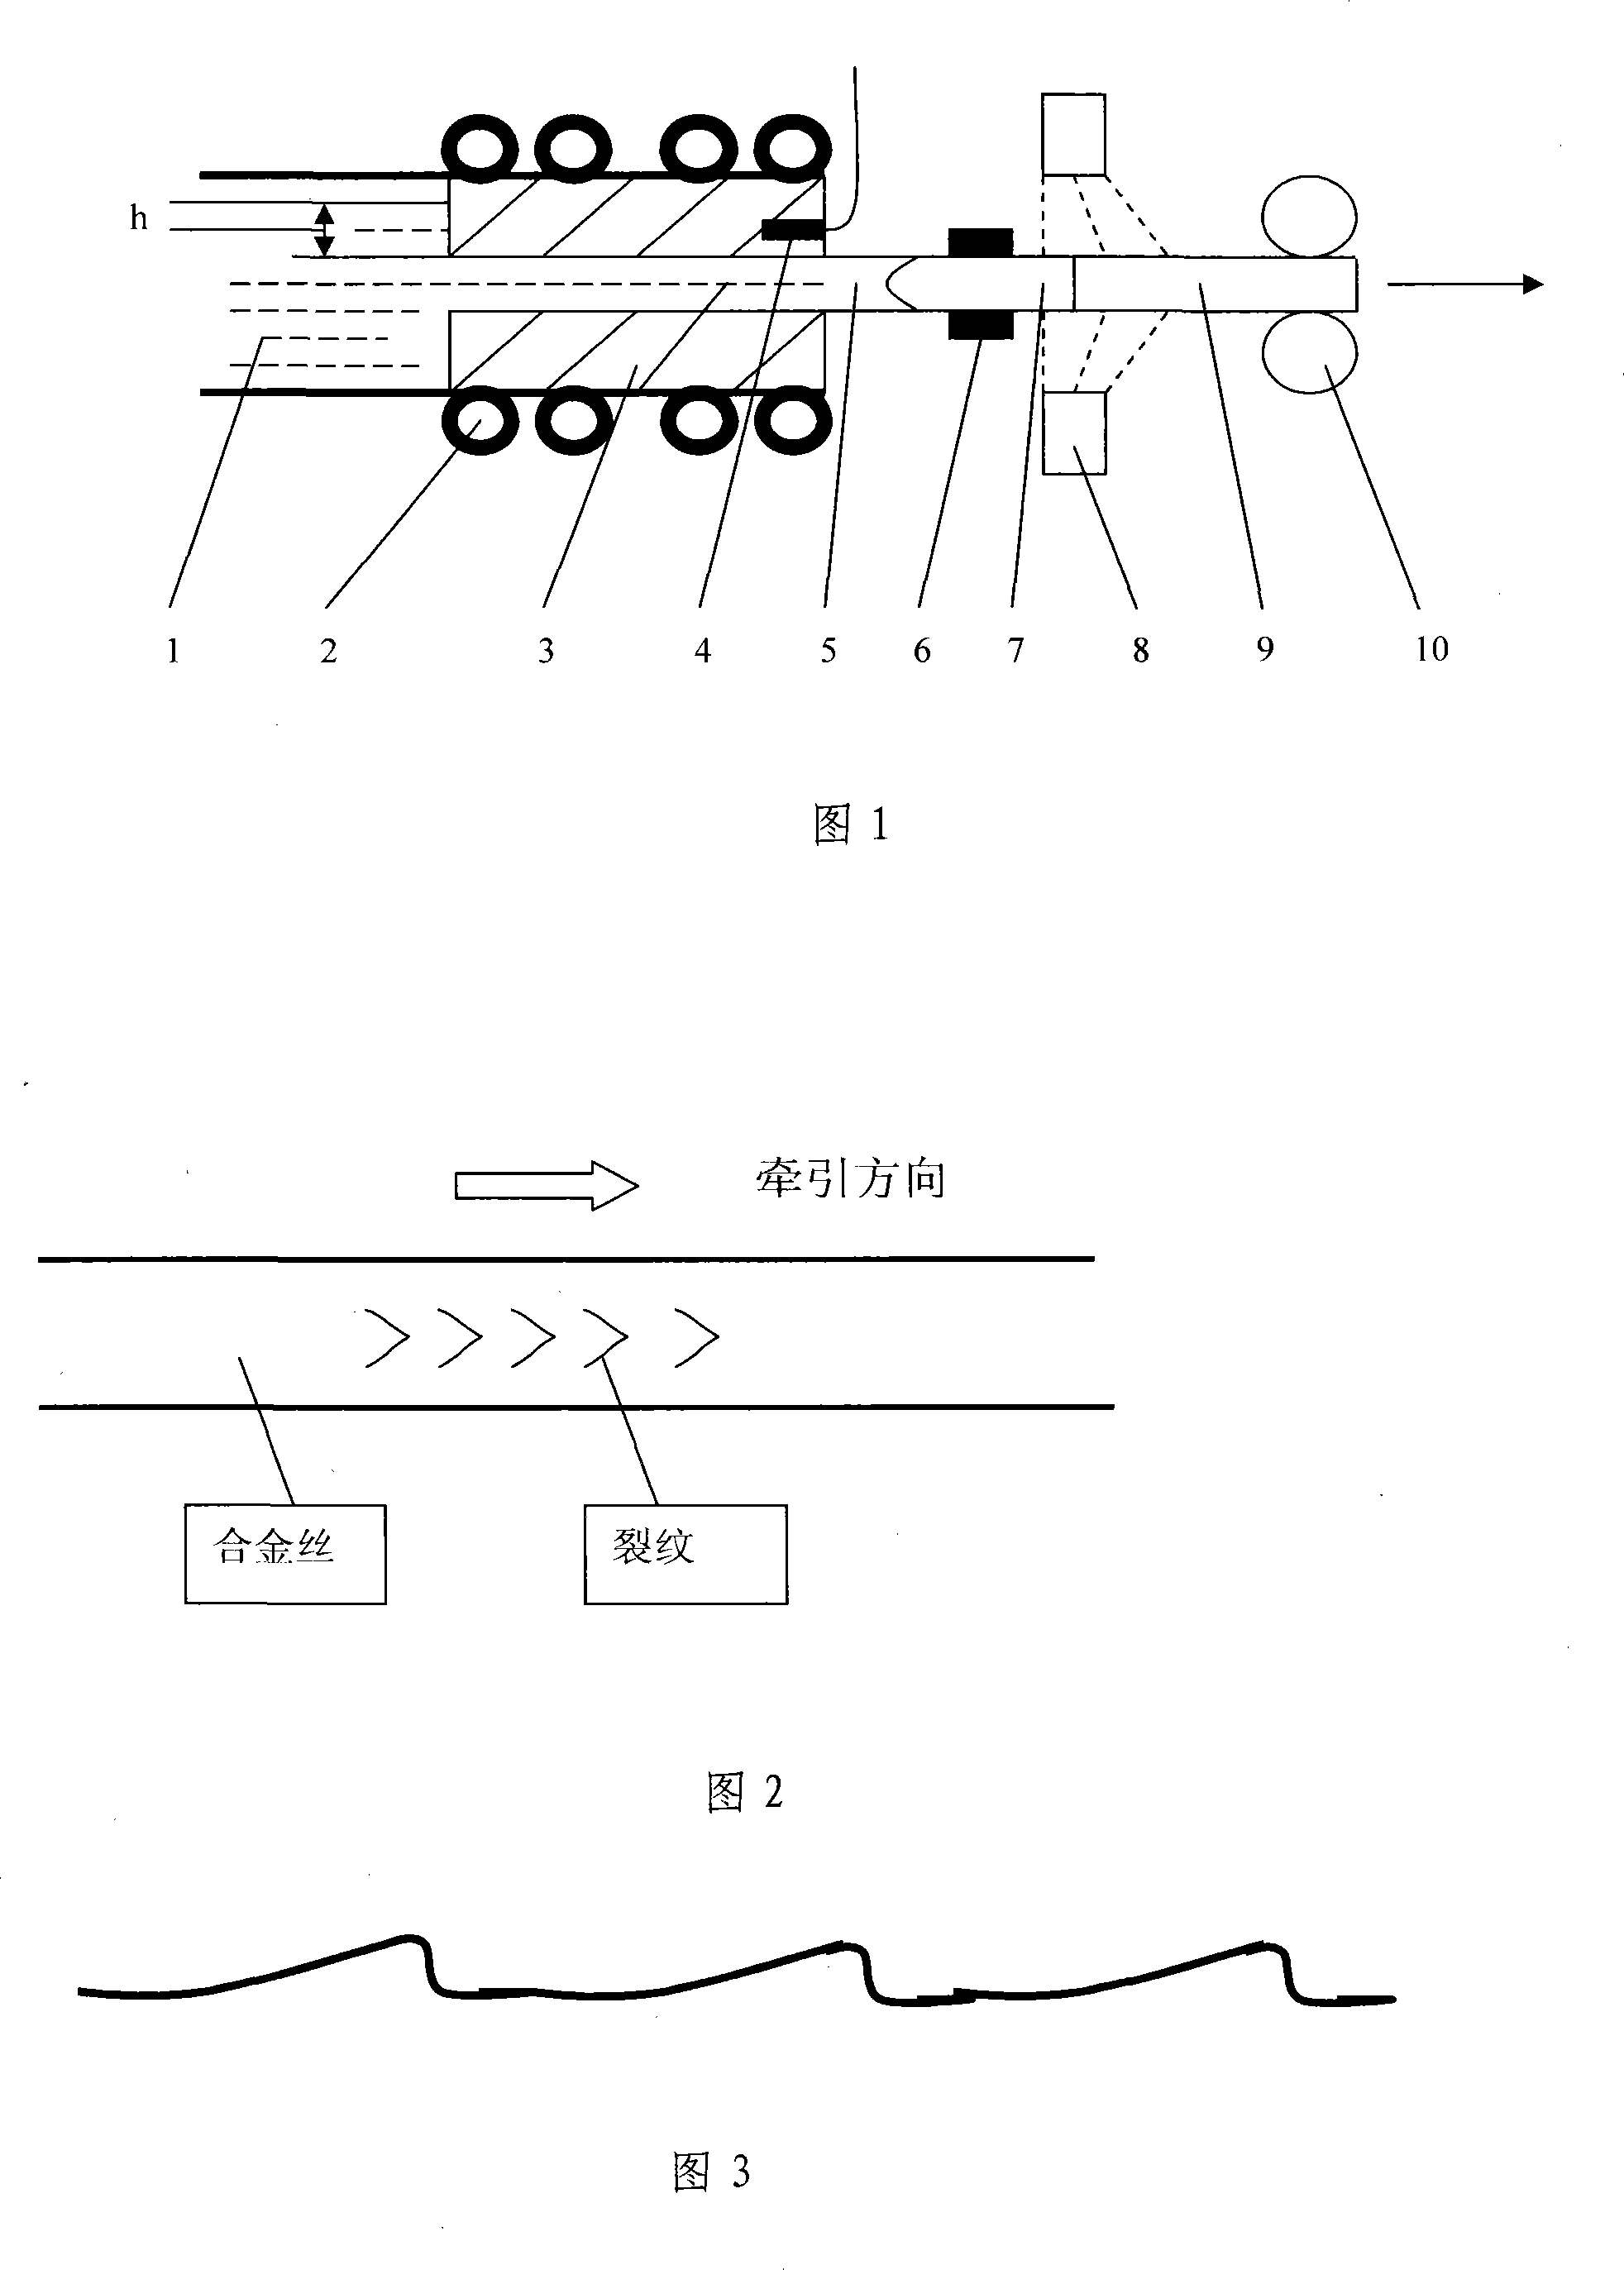 Apparatus and method for continuously casting copper base shape memory alloy wire